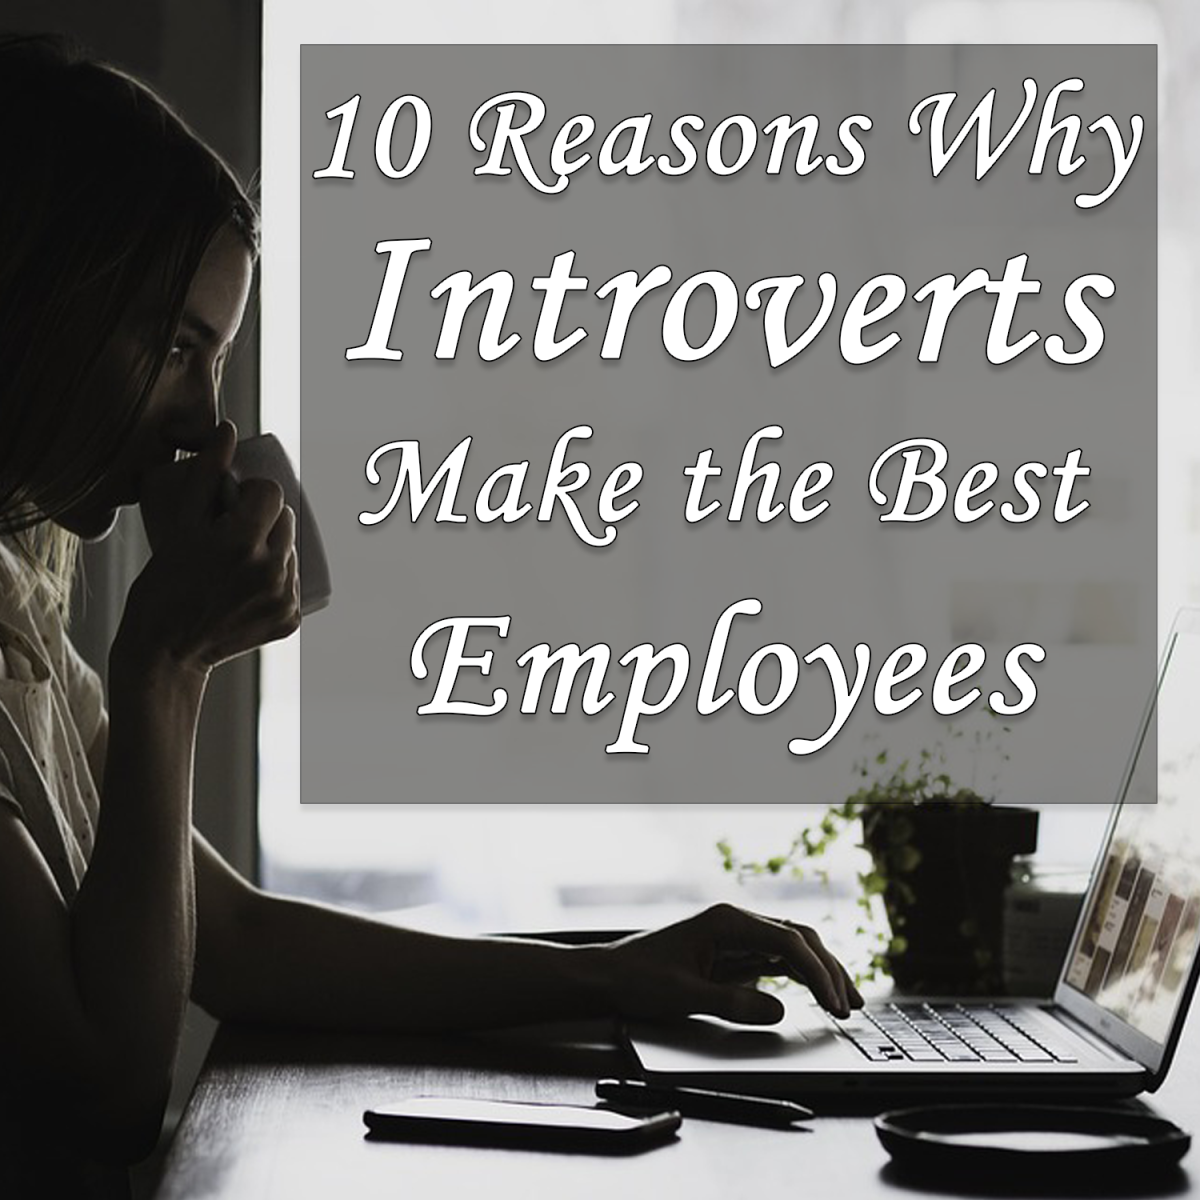 10 Reasons Why Introverts Make the Best Employees